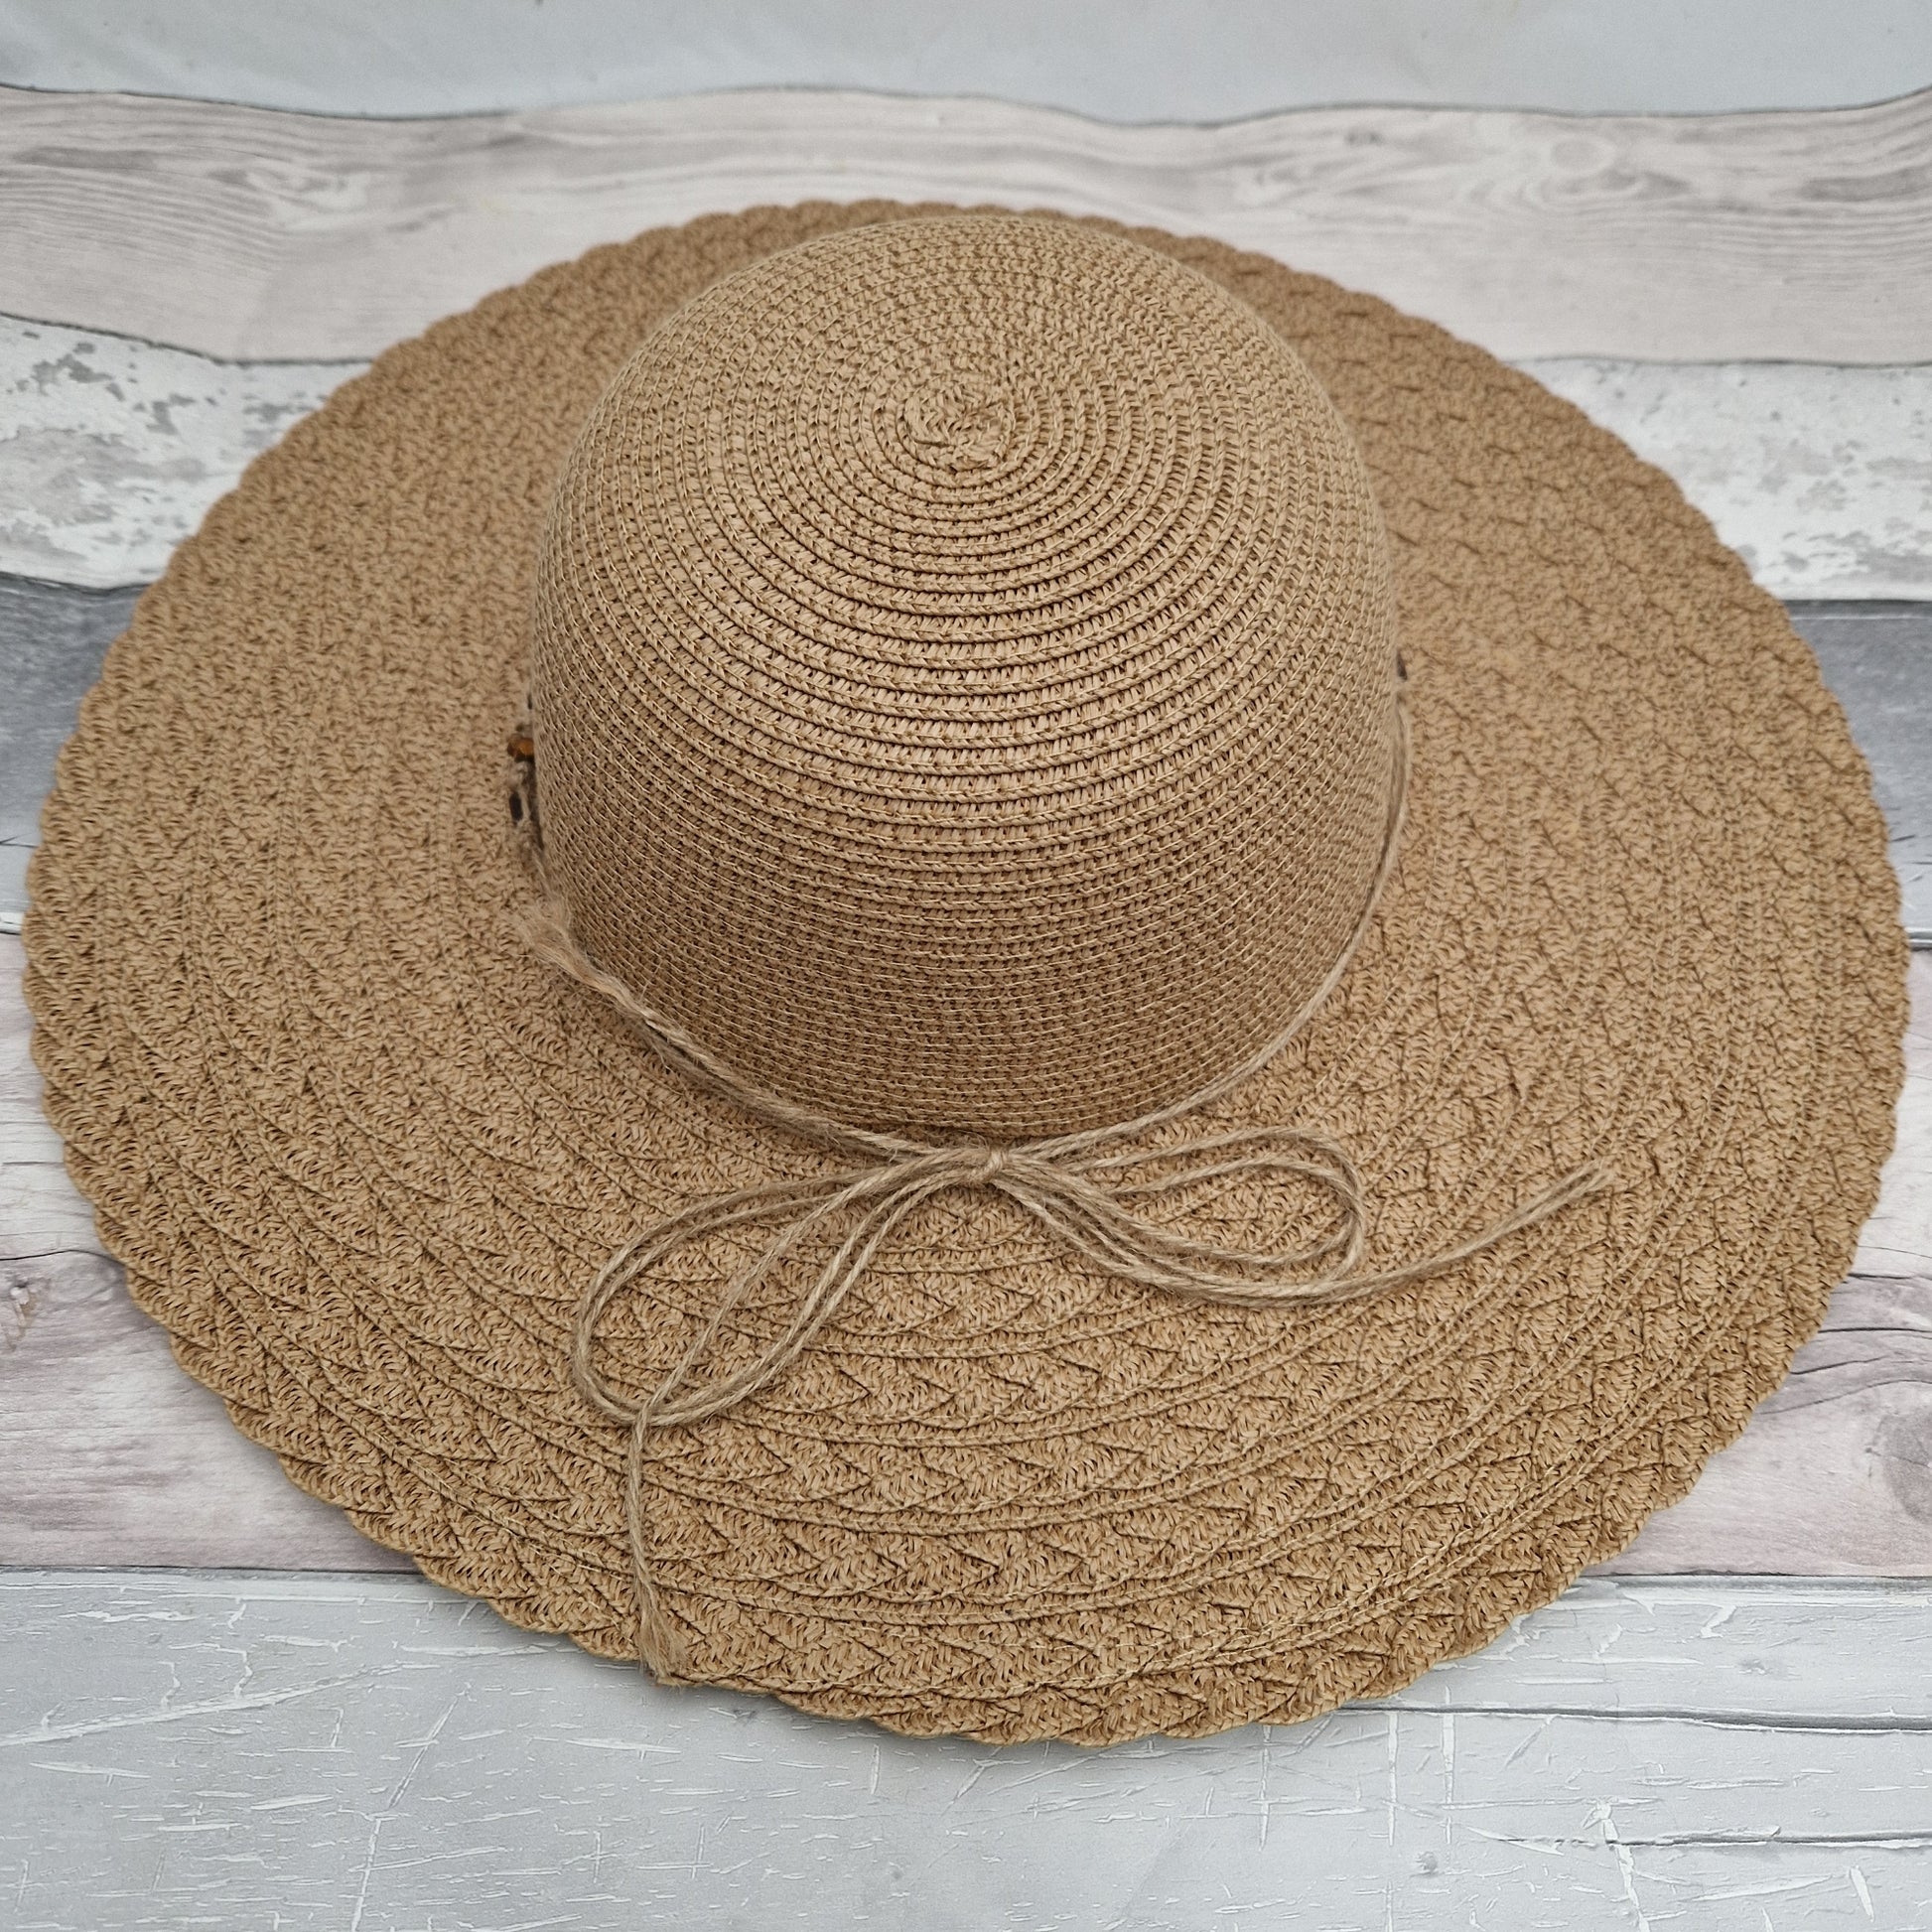 Natural coloured wide brimmed hat with a beaded band.